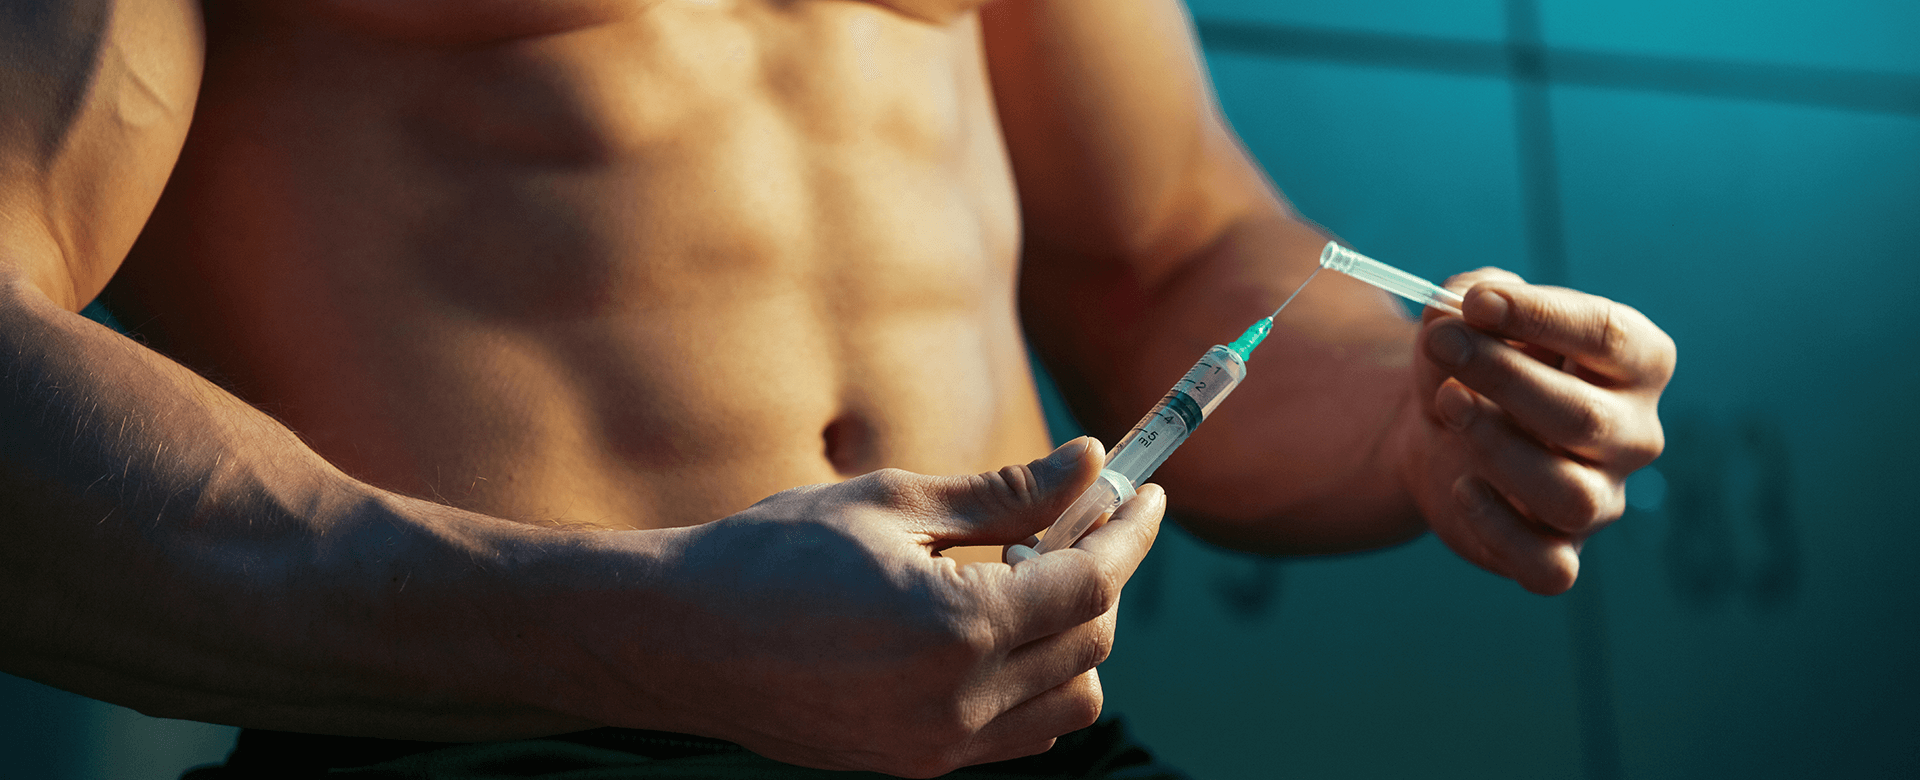 Muscular Man Holding Syringe - Difference Between Steroids and Injectable HGH